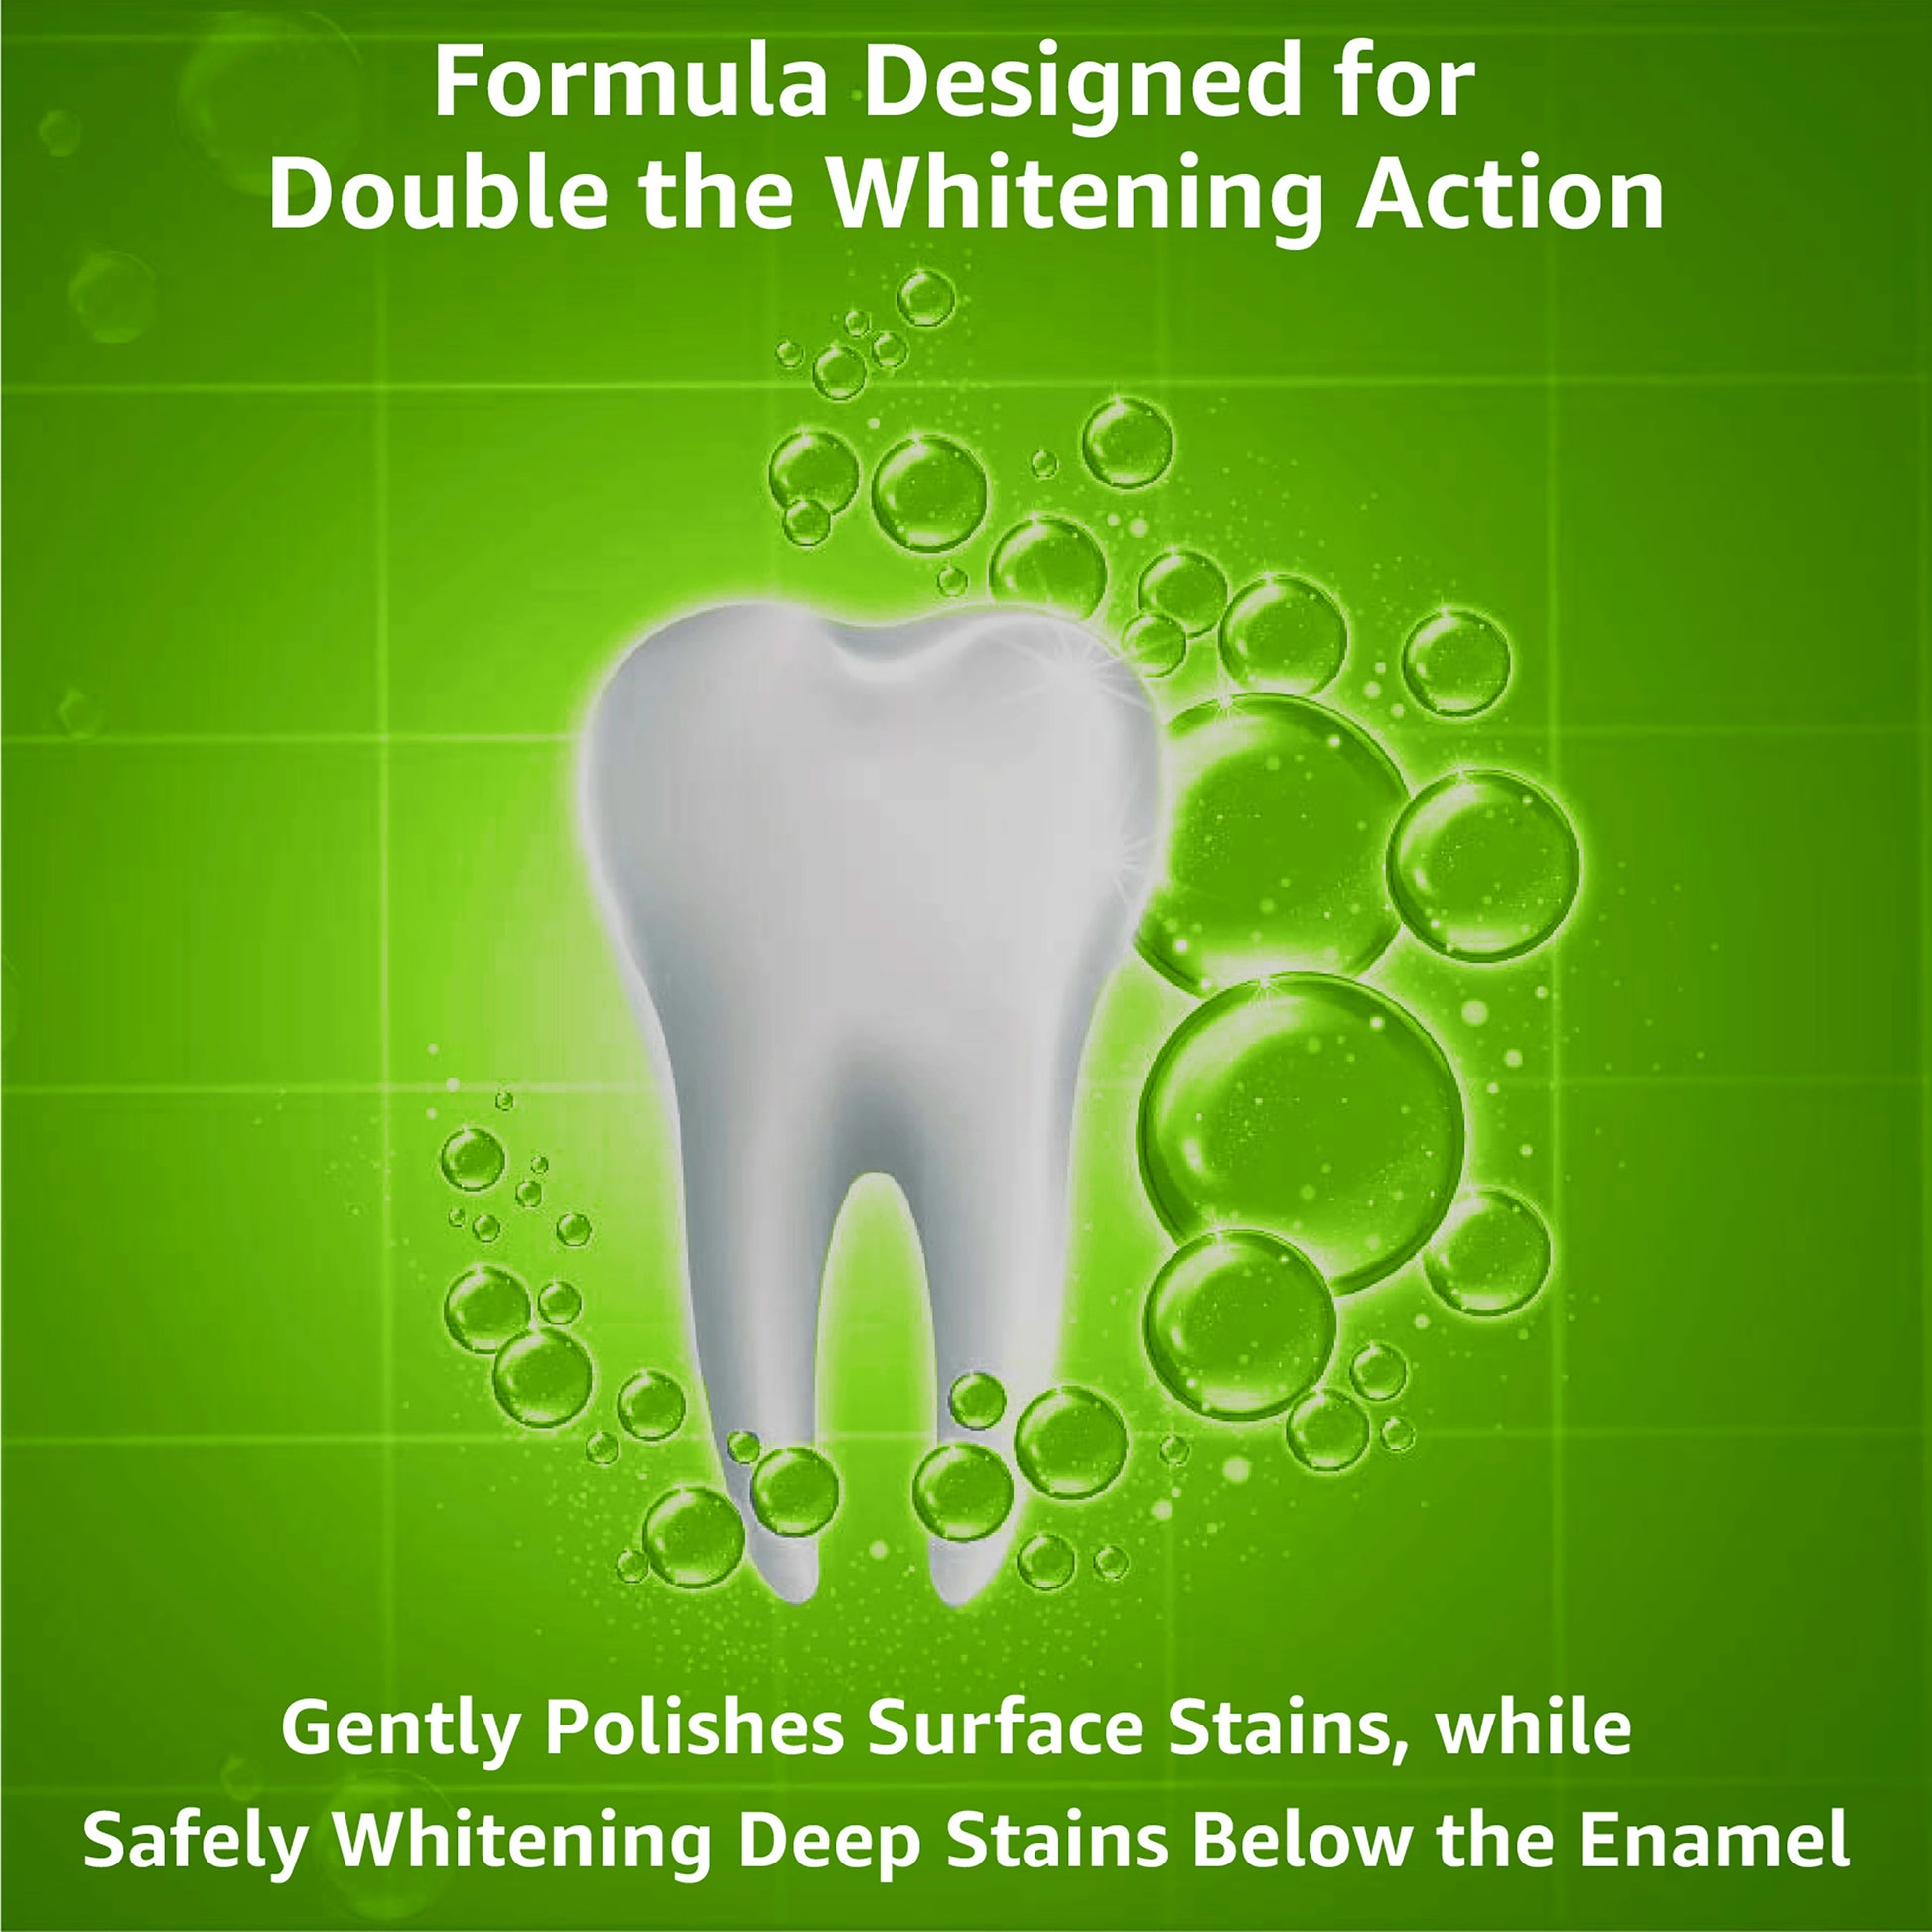 Formula designed for double the whitening action, gently polishes surface stains while safely whitening deep stains below the enamel